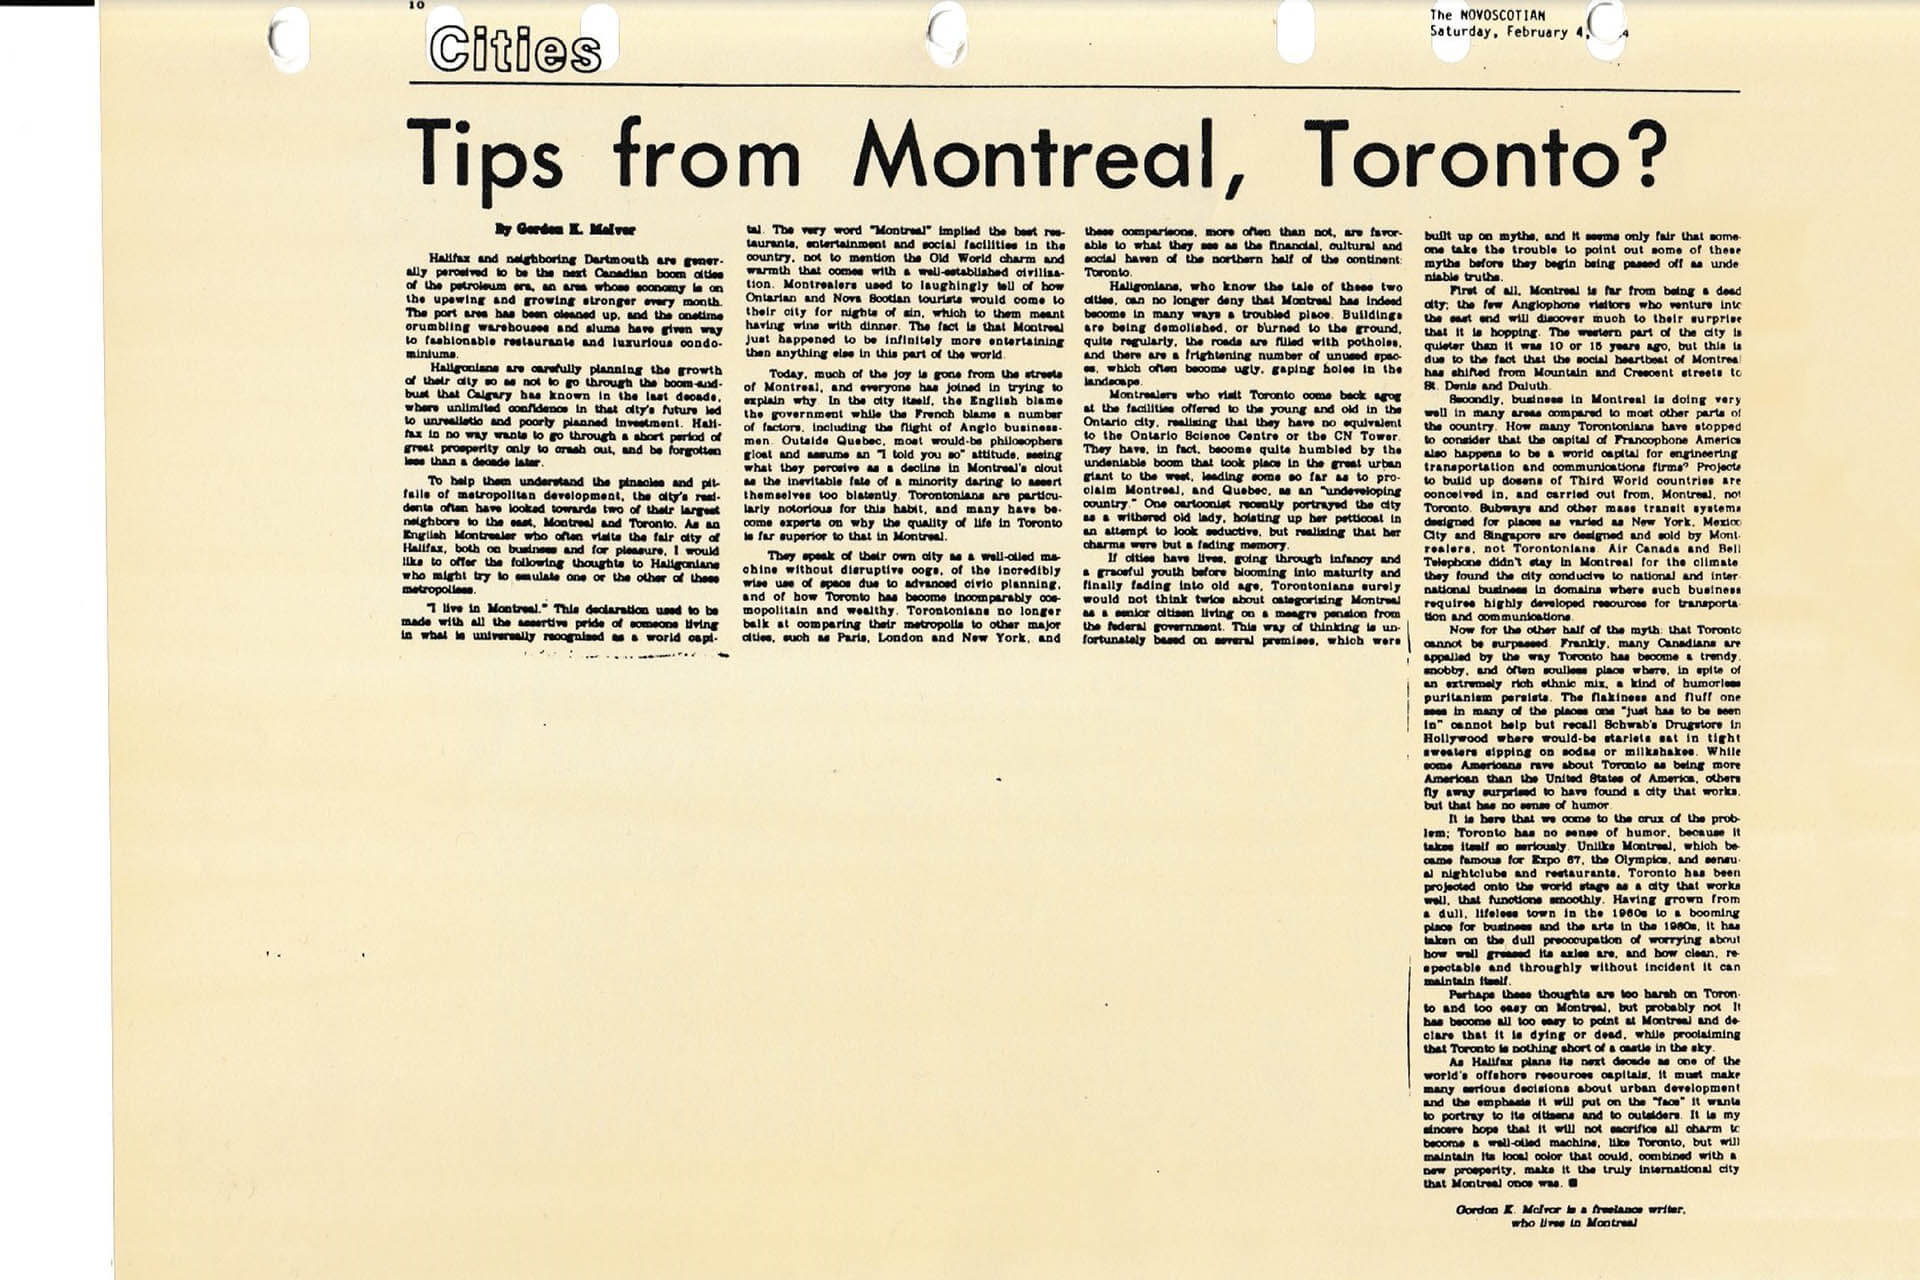 A News Paper Clippings of Clippings on Tips From Montreal